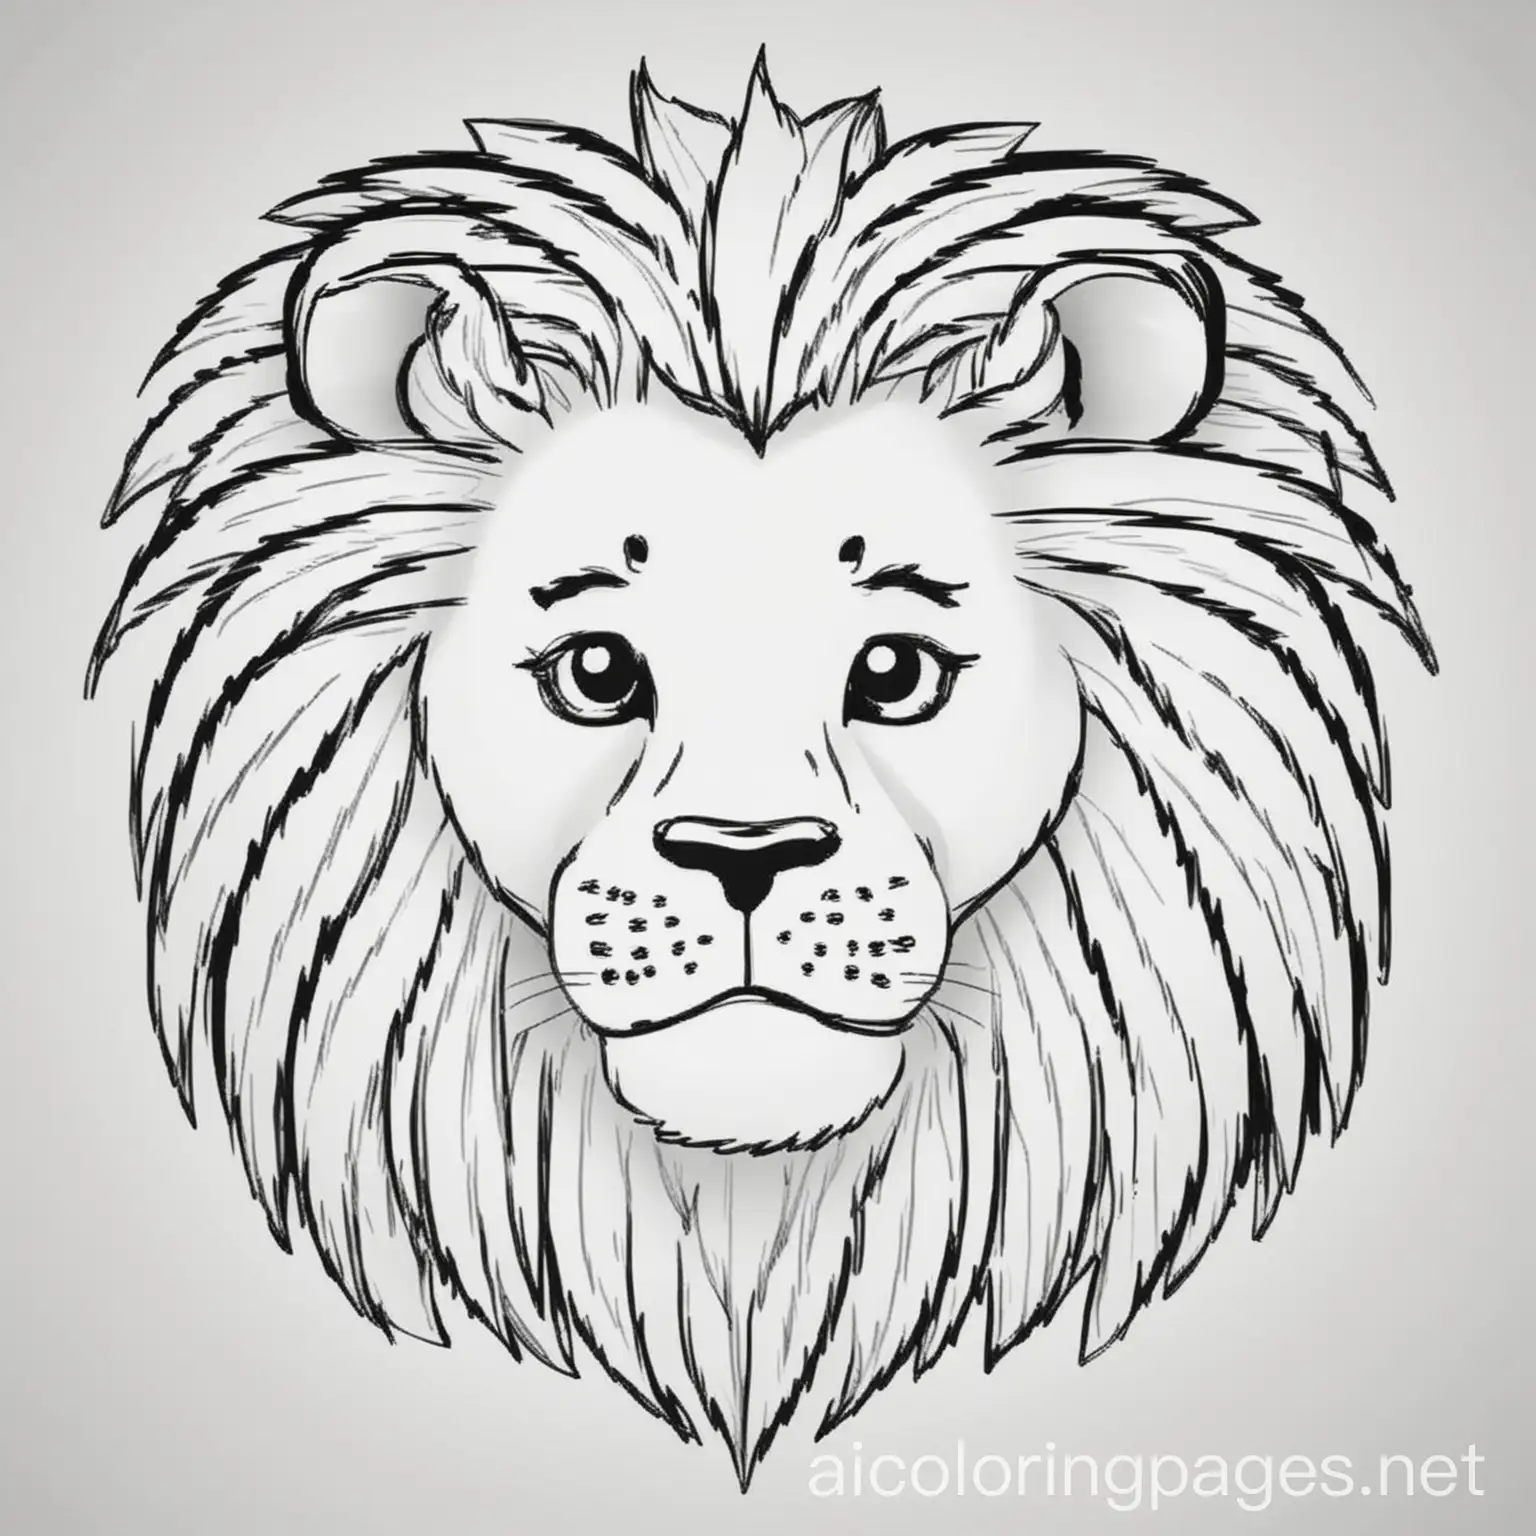 Lion, Coloring Page, black and white, line art, white background, Simplicity, Ample White Space. The background of the coloring page is plain white to make it easy for young children to color within the lines. The outlines of all the subjects are easy to distinguish, making it simple for kids to color without too much difficulty